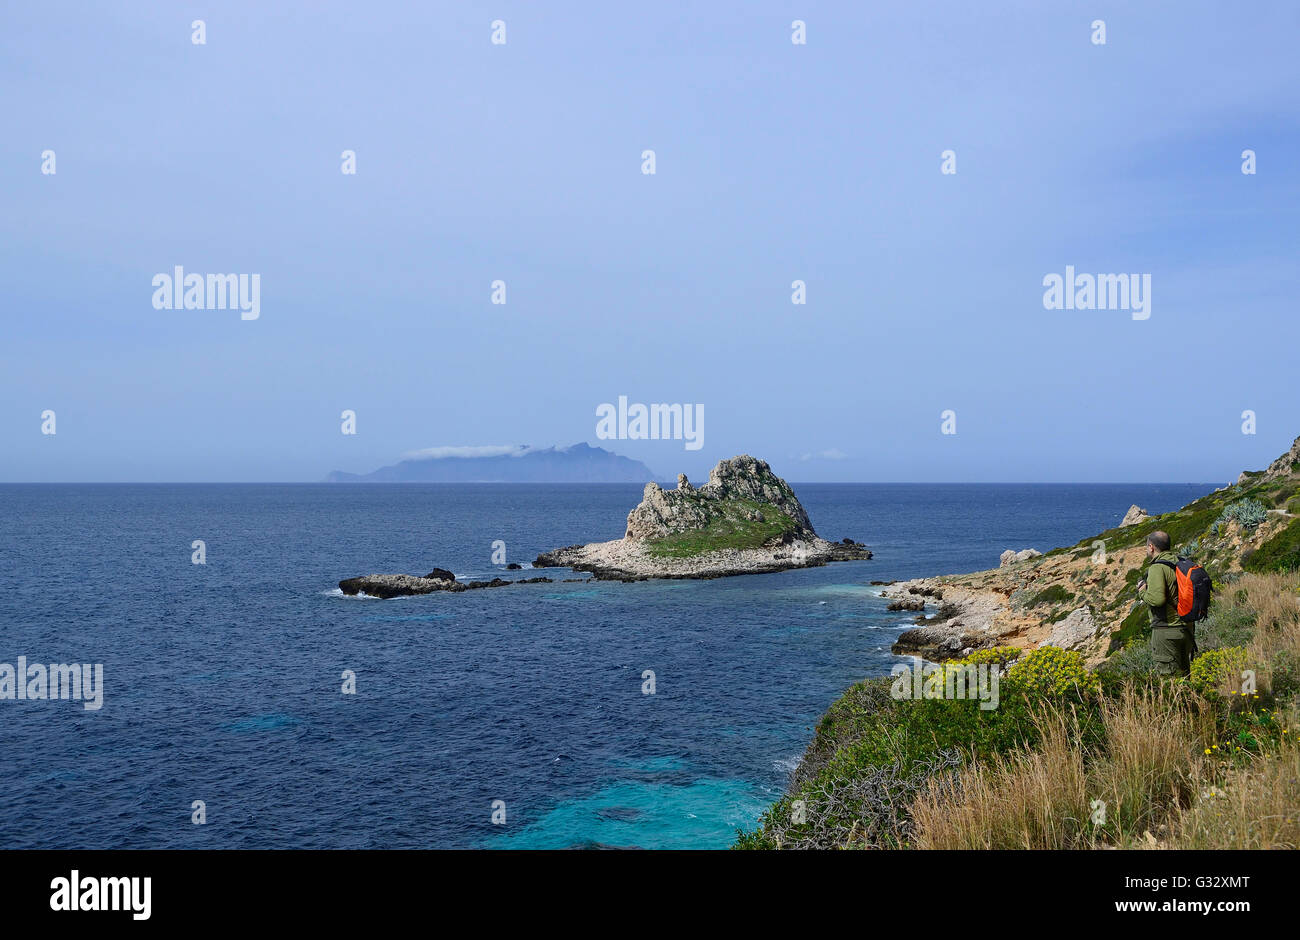 taly, Sicily, Egadi islands, island of Levanzo, hiker on a coastal path overlooking sea with island Faraglione in background Stock Photo